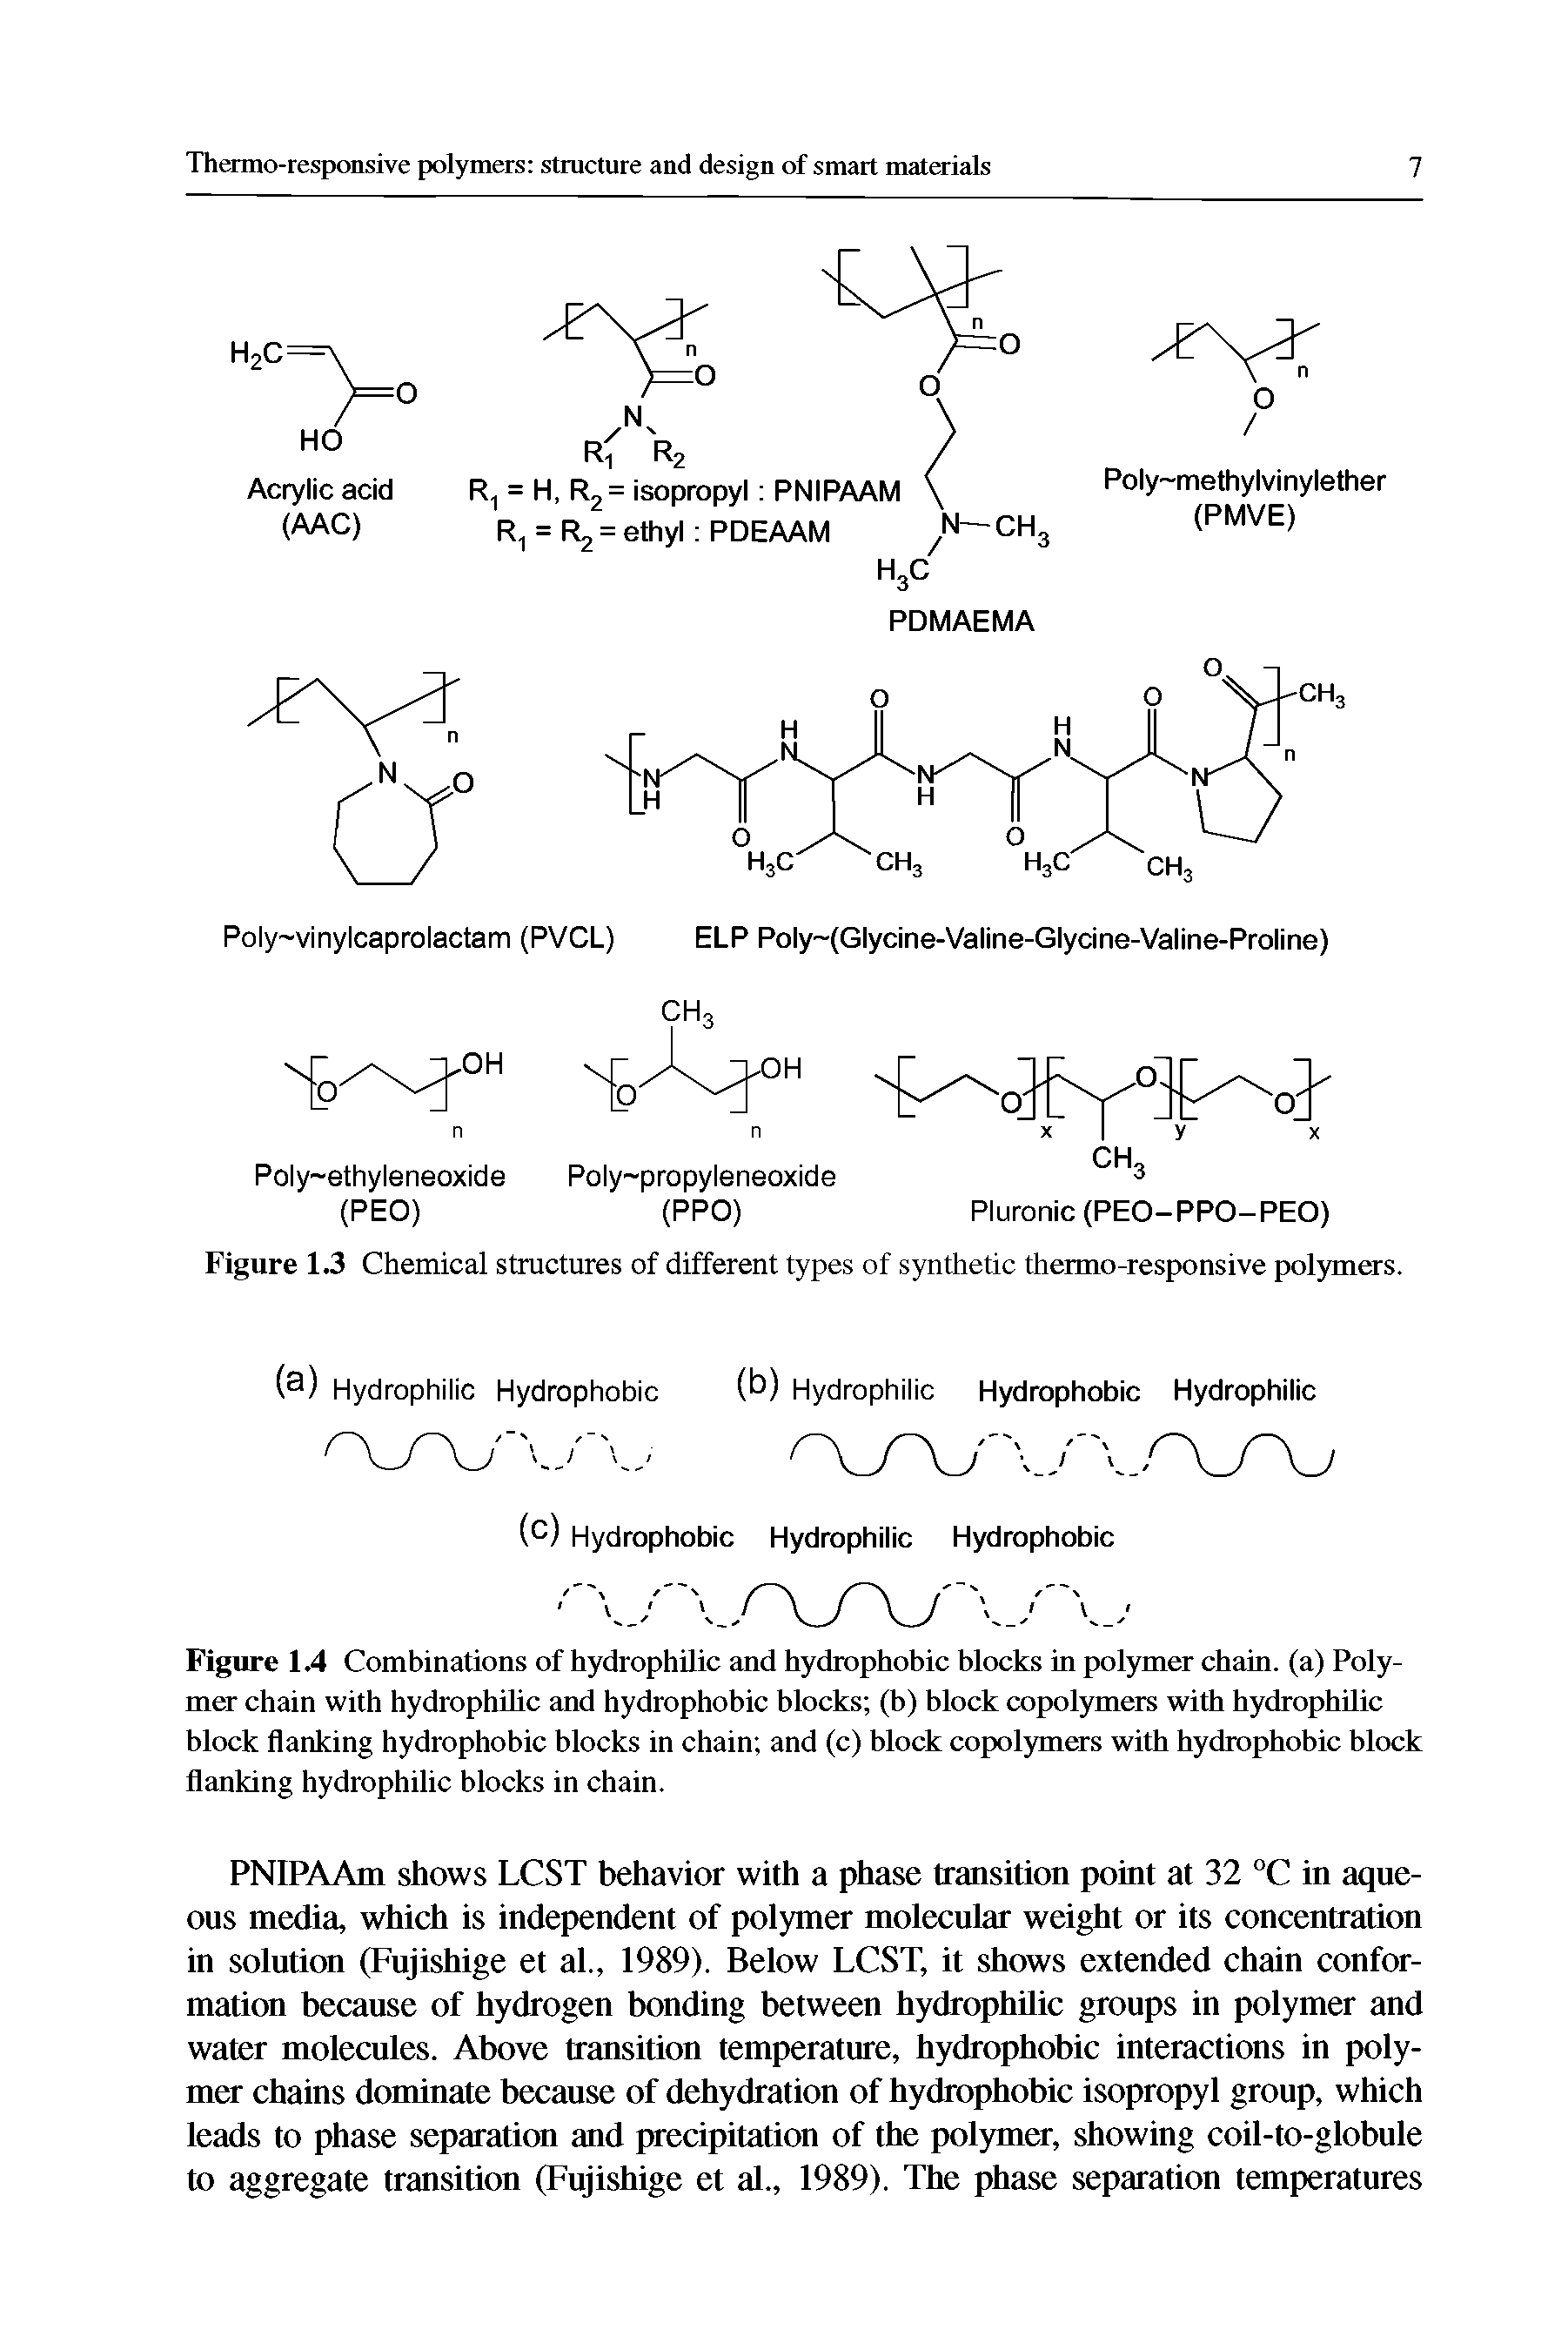 Figure U Chemical structures of different types of synthetic thermo-responsive polymers.